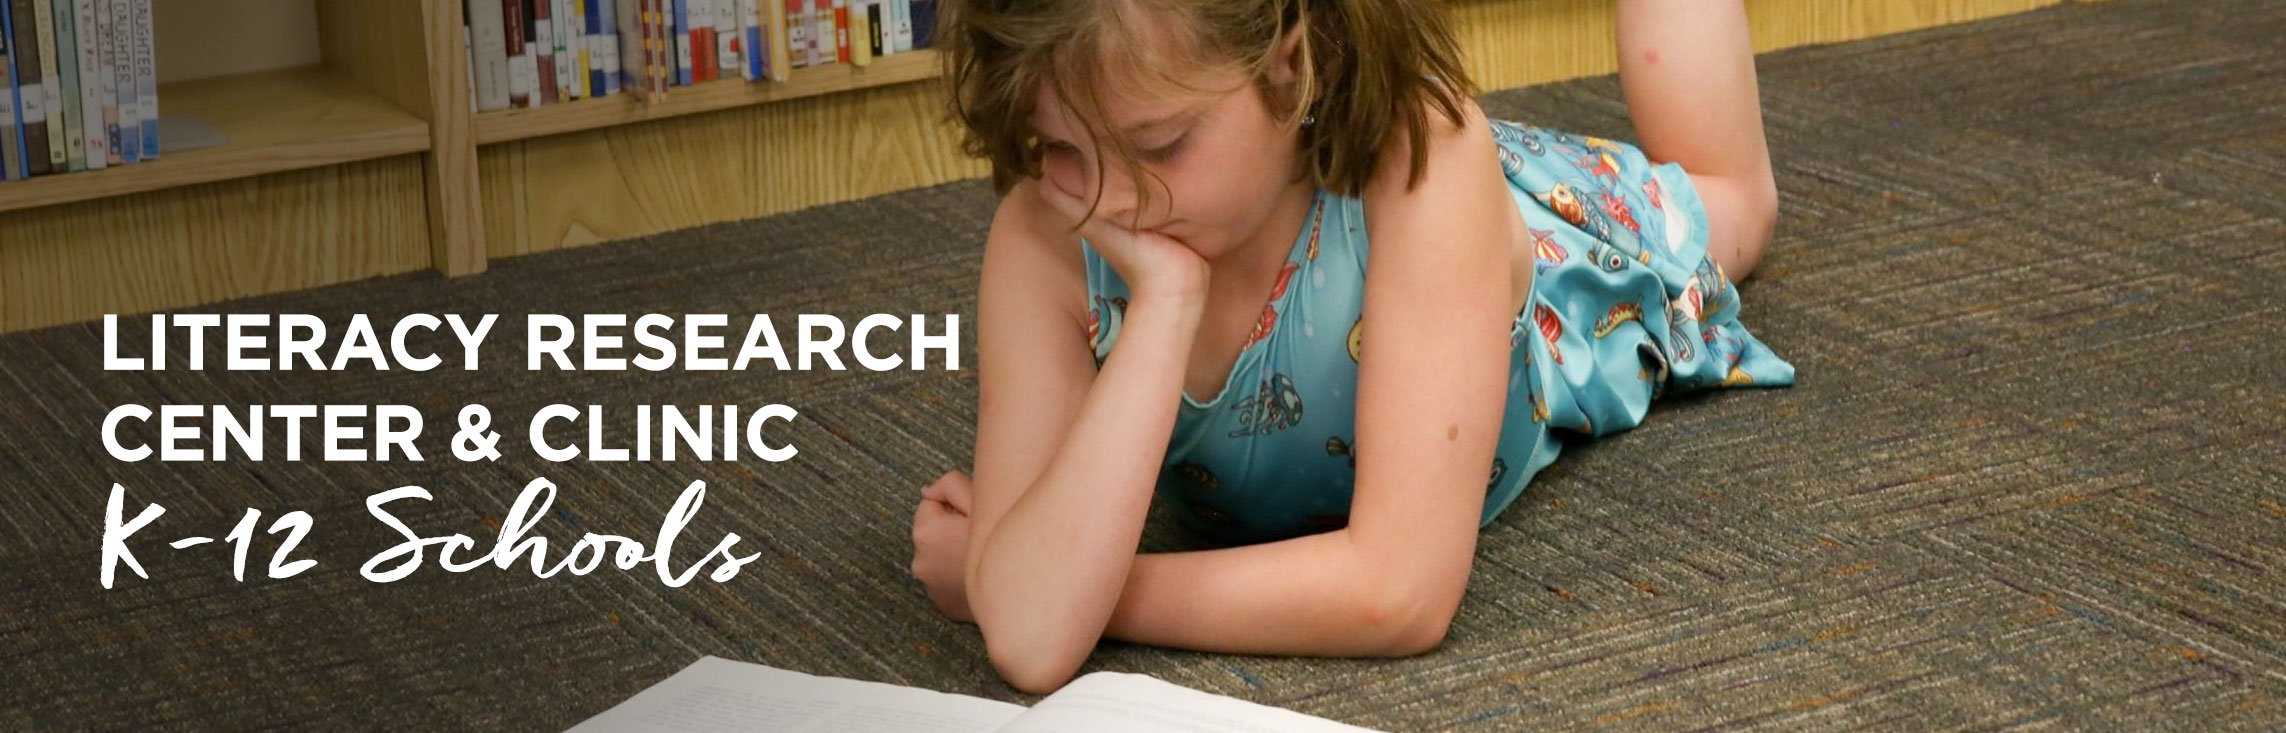 Teacher tutoring students with wording: Literacy Research Center & Clinic K-12 Schools